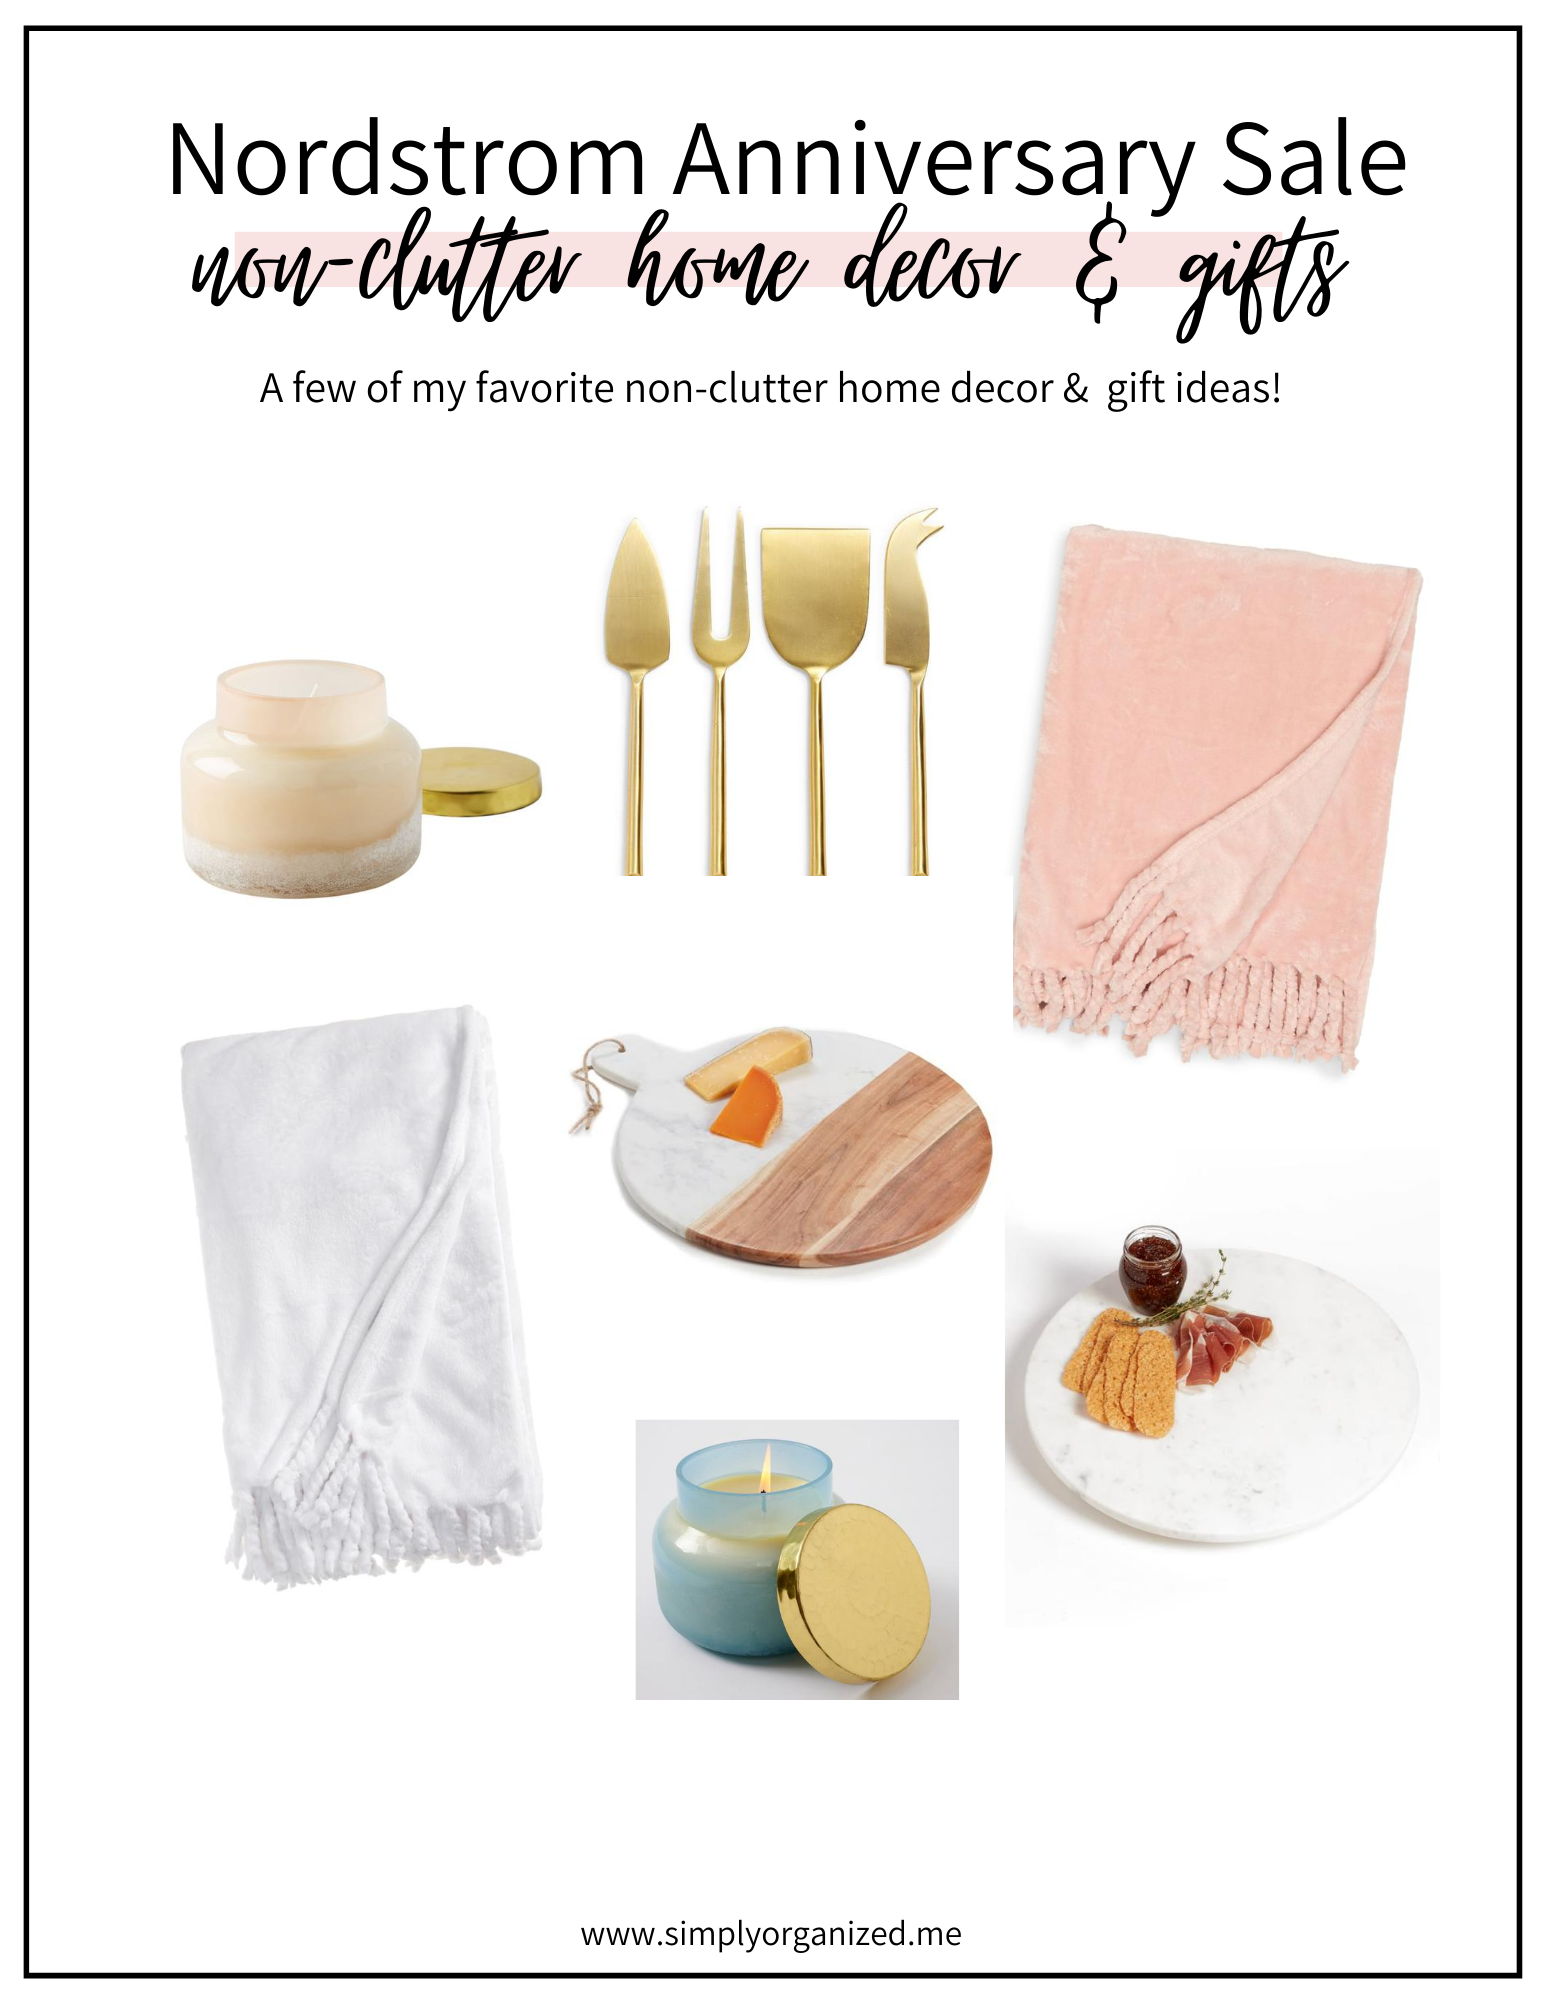 Nordstrom Anniversary Sale – Home Decor & Gift Ideas - Simply